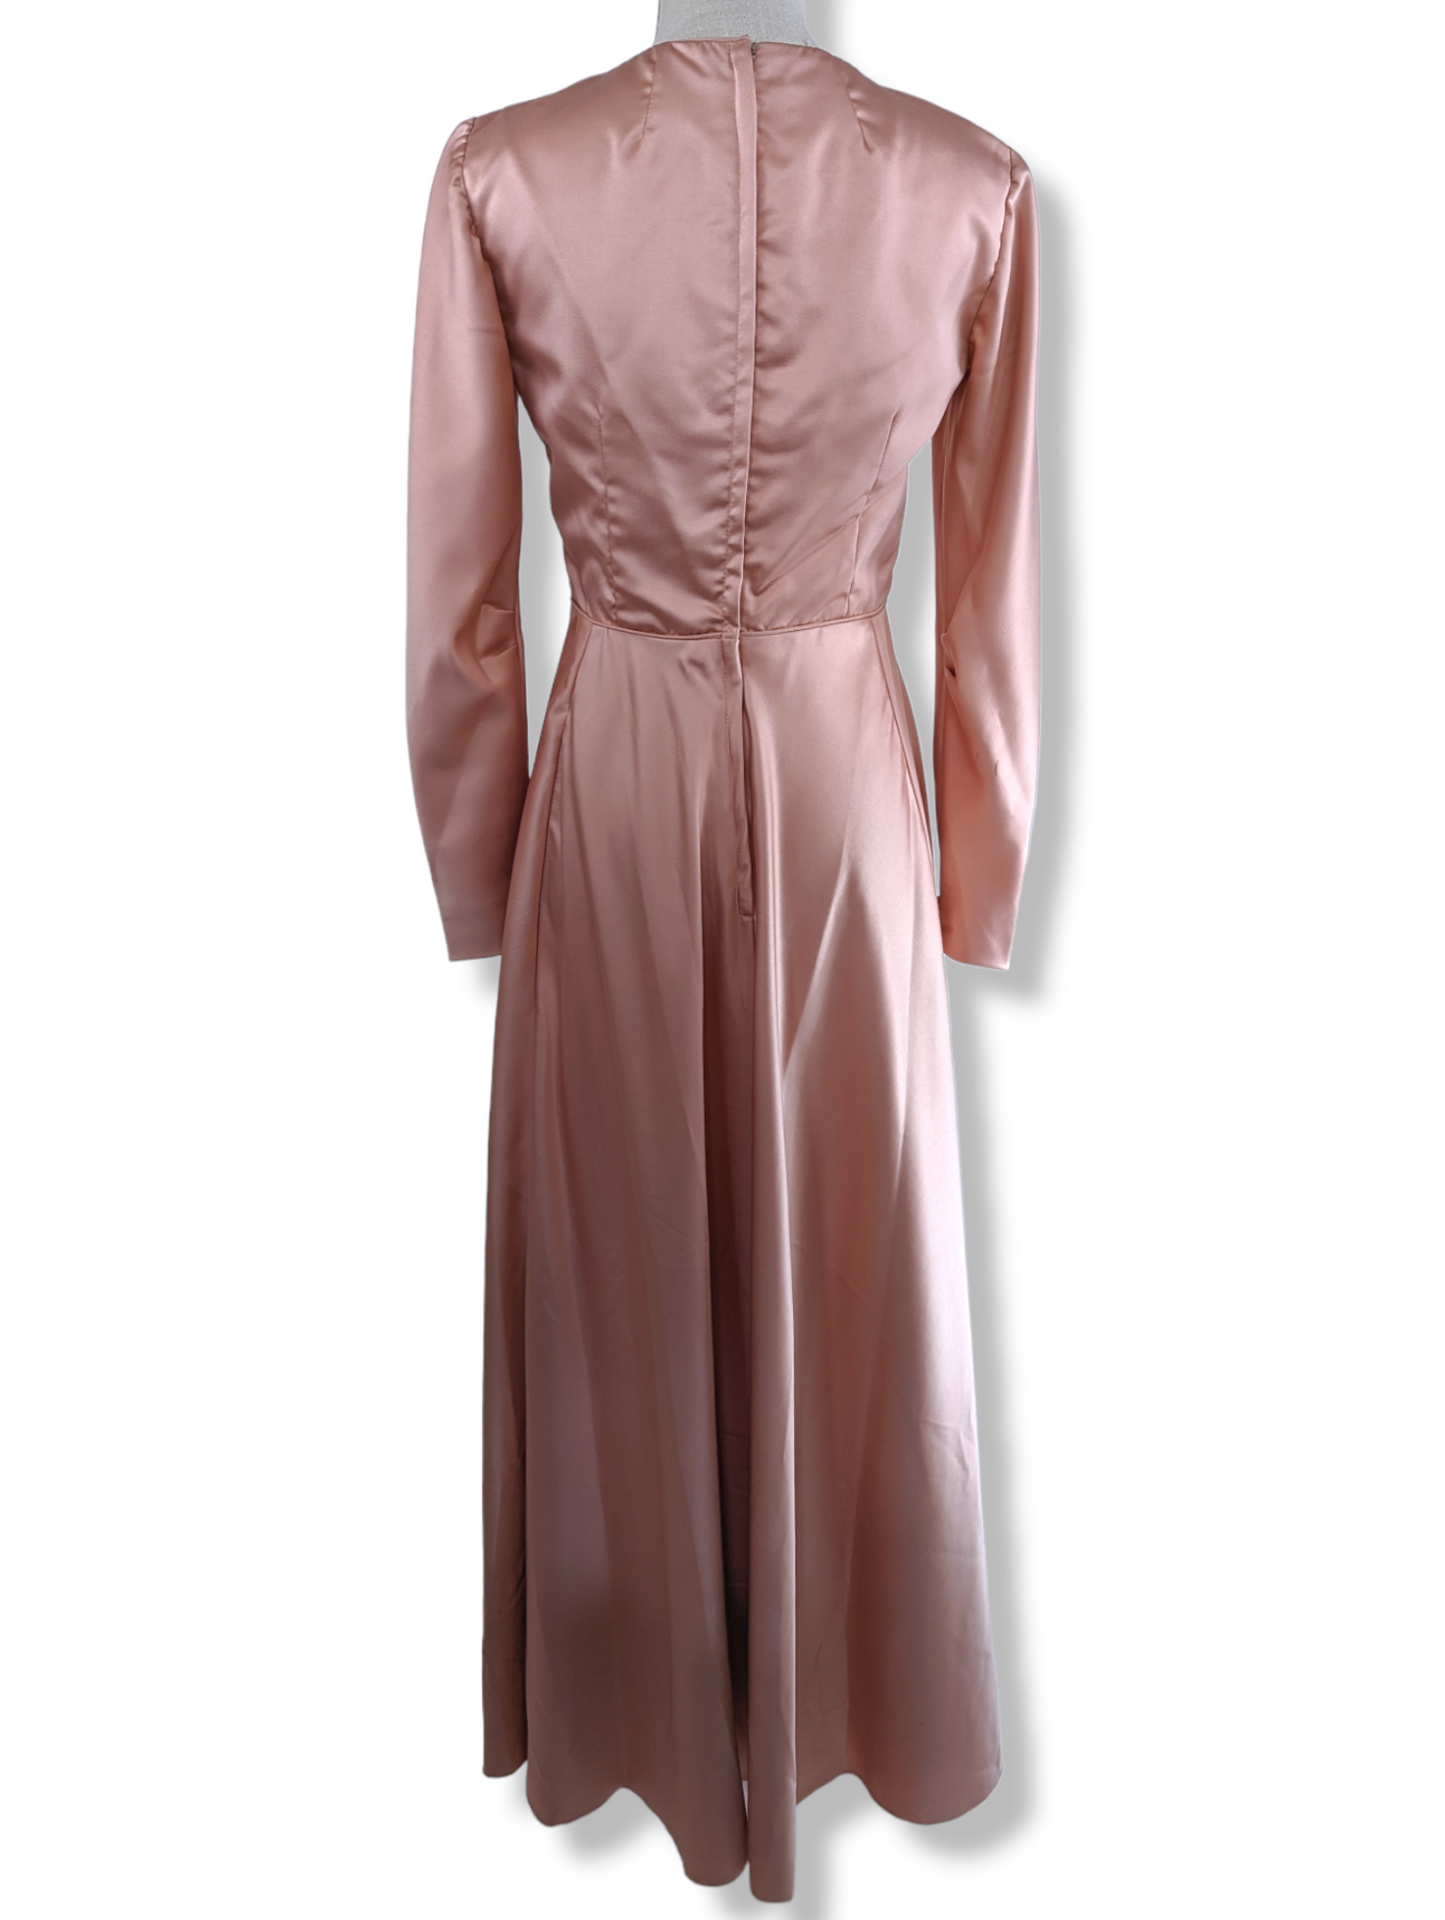 Vintage Silk Satin Dusty Rose Pink Dress with Long Sleeves, V Neckline, and Sheer Chiffon Organza Tiered Removable Cape